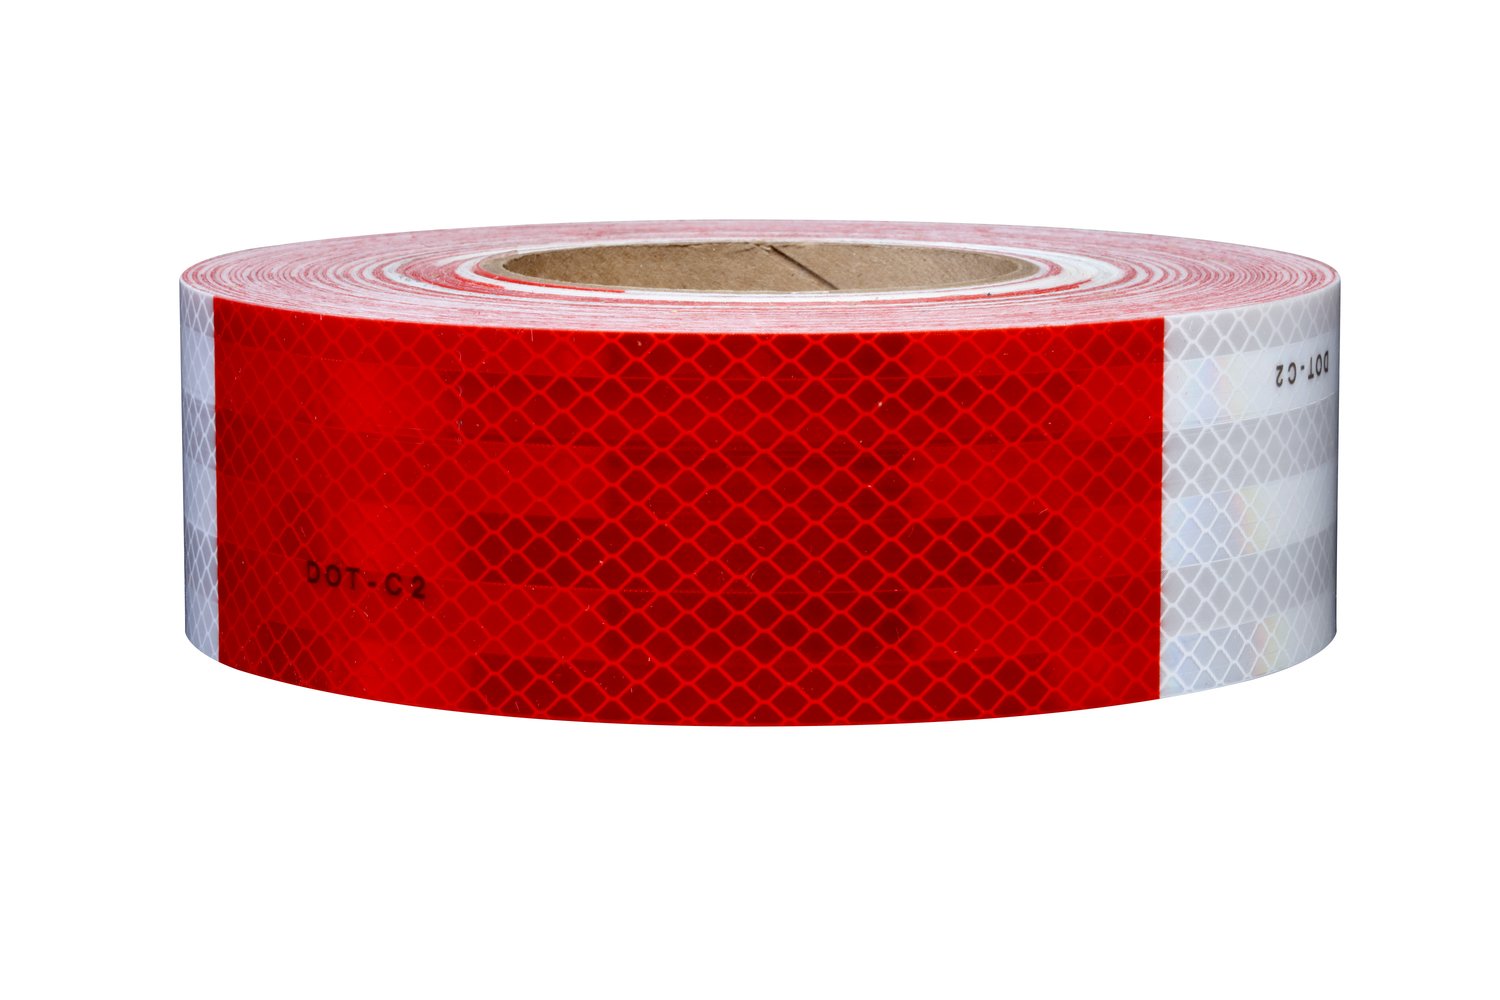 7010390725 - 3M Diamond Grade Conspicuity Markings 983-326, Red/White, 2 in x 50
yd, kiss-cut every 2 in and 24 in